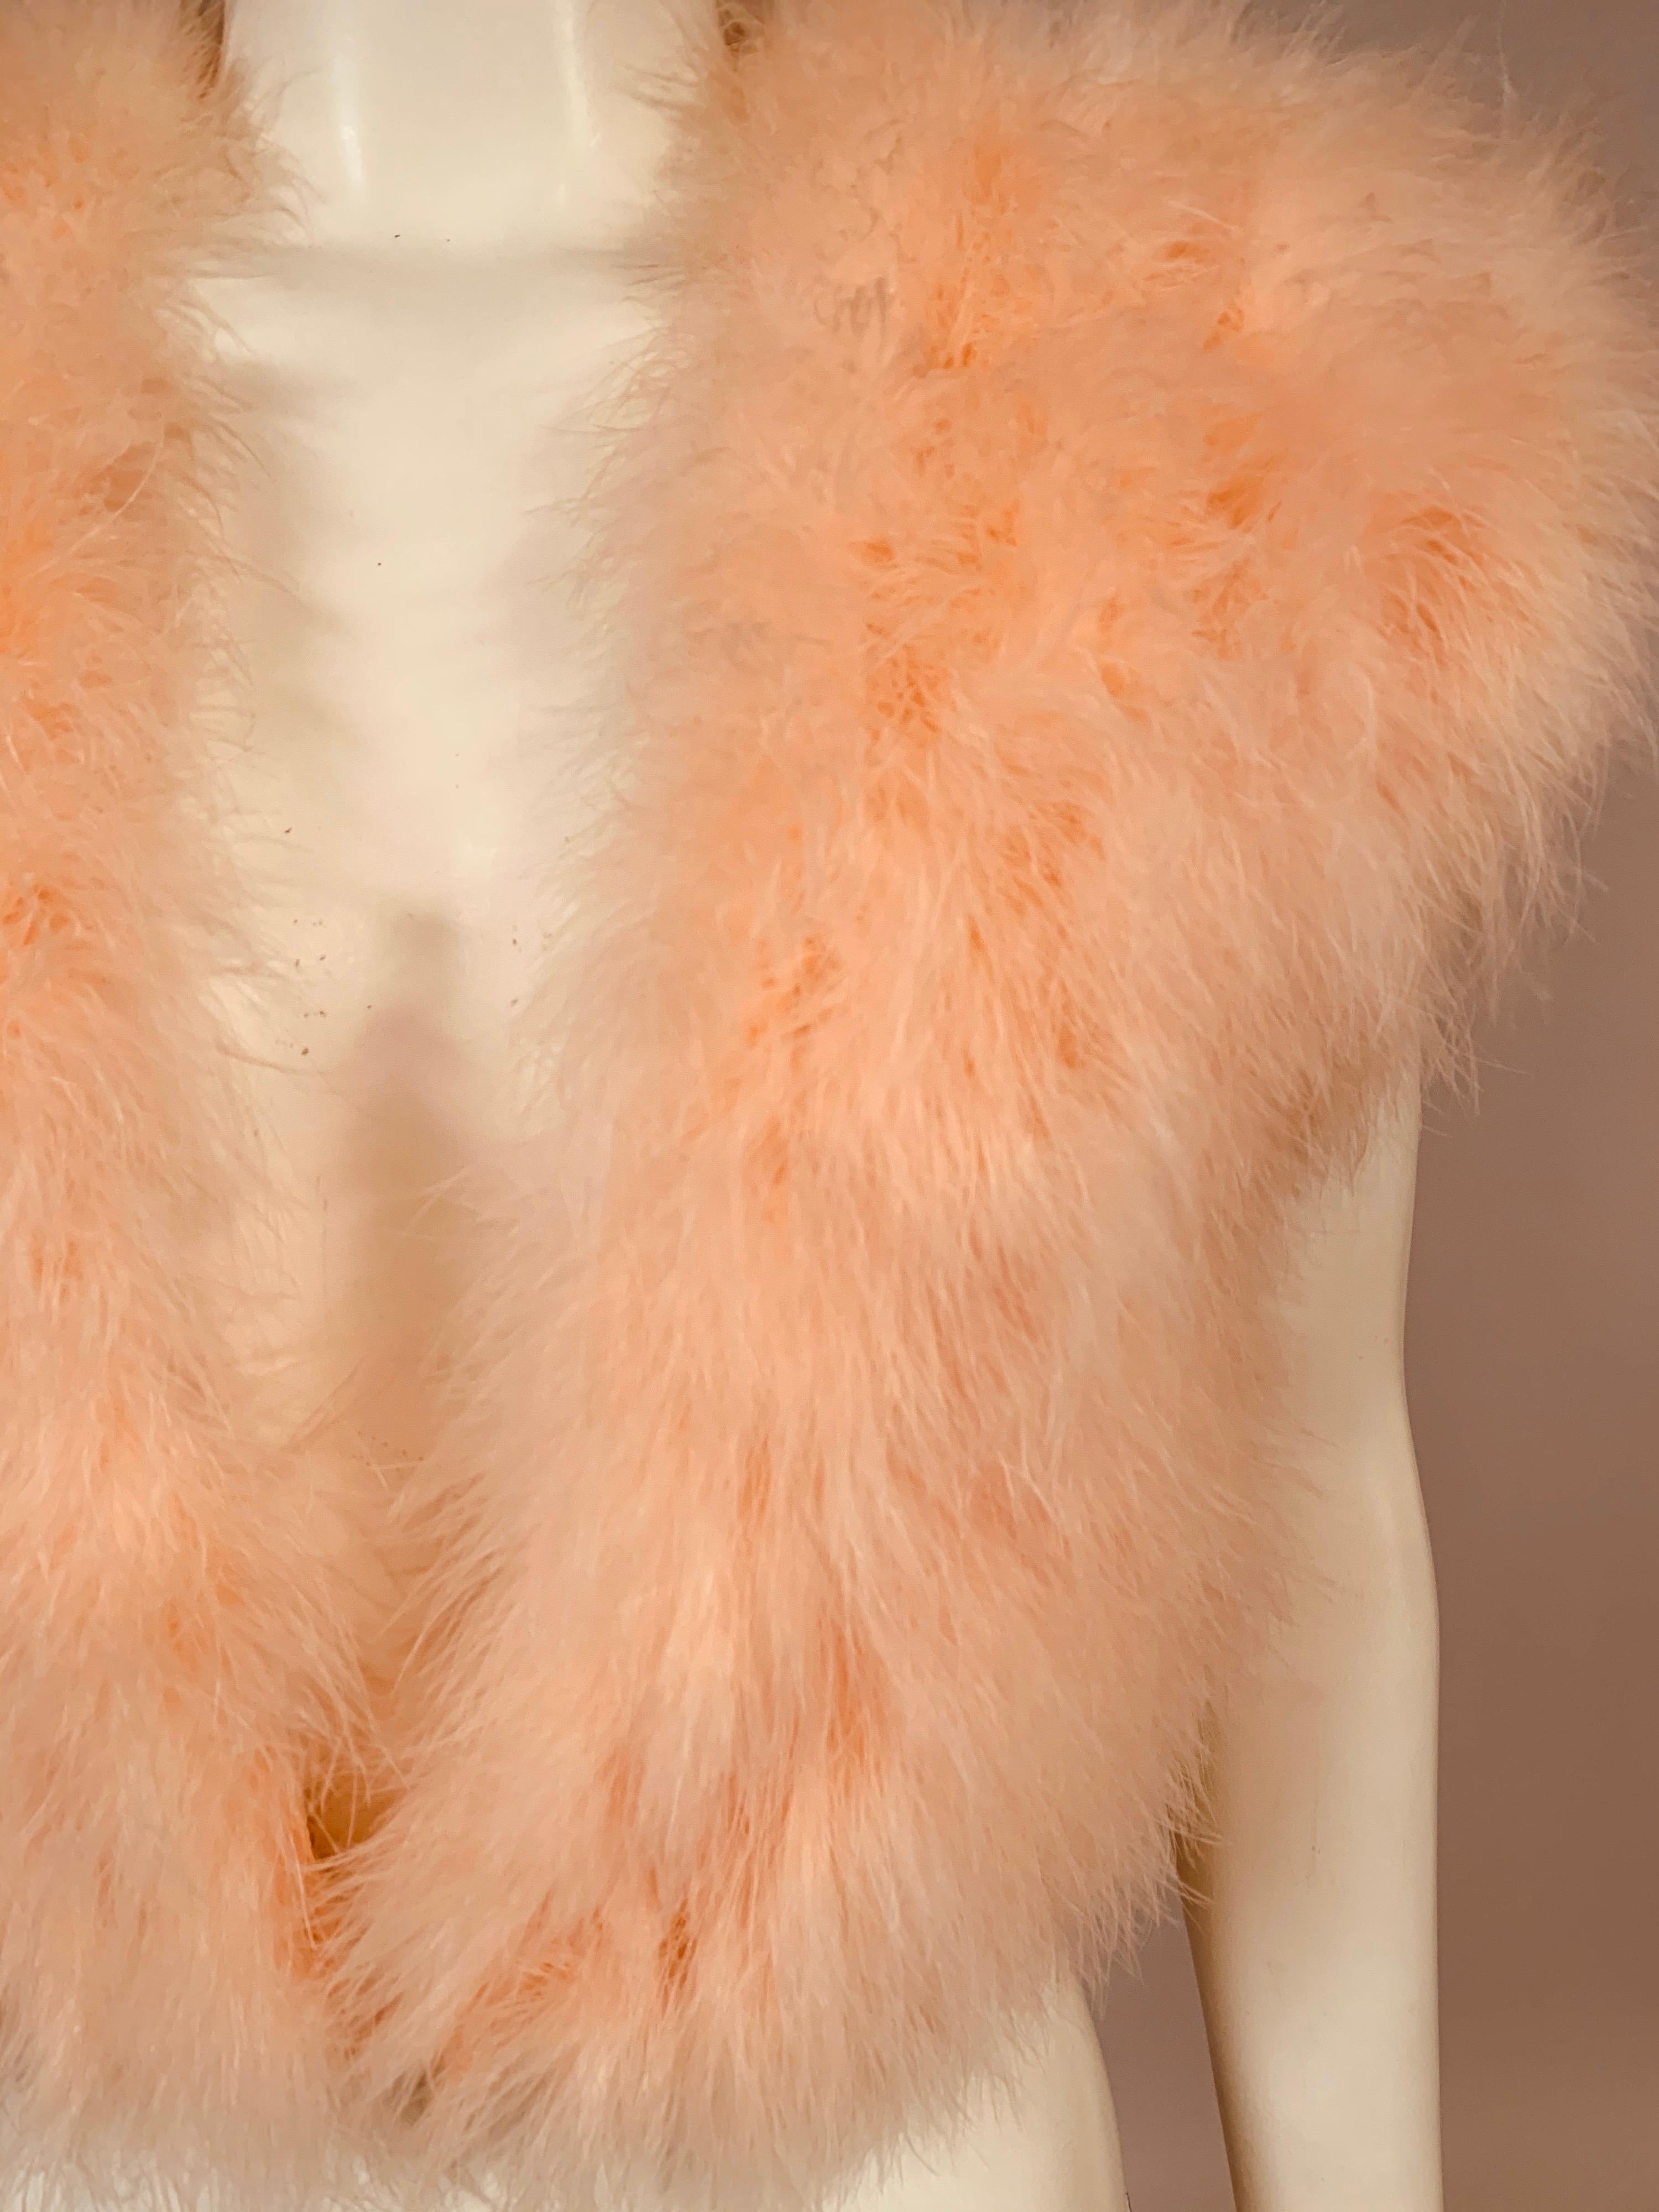 In pristine condition, this ultra feminine marabou feather vest appears to have been worn very little if at all.  The marabou is fluffy and bright and the peach satin lining is in excellent condition. The vest has a V shaped neckline with one fur